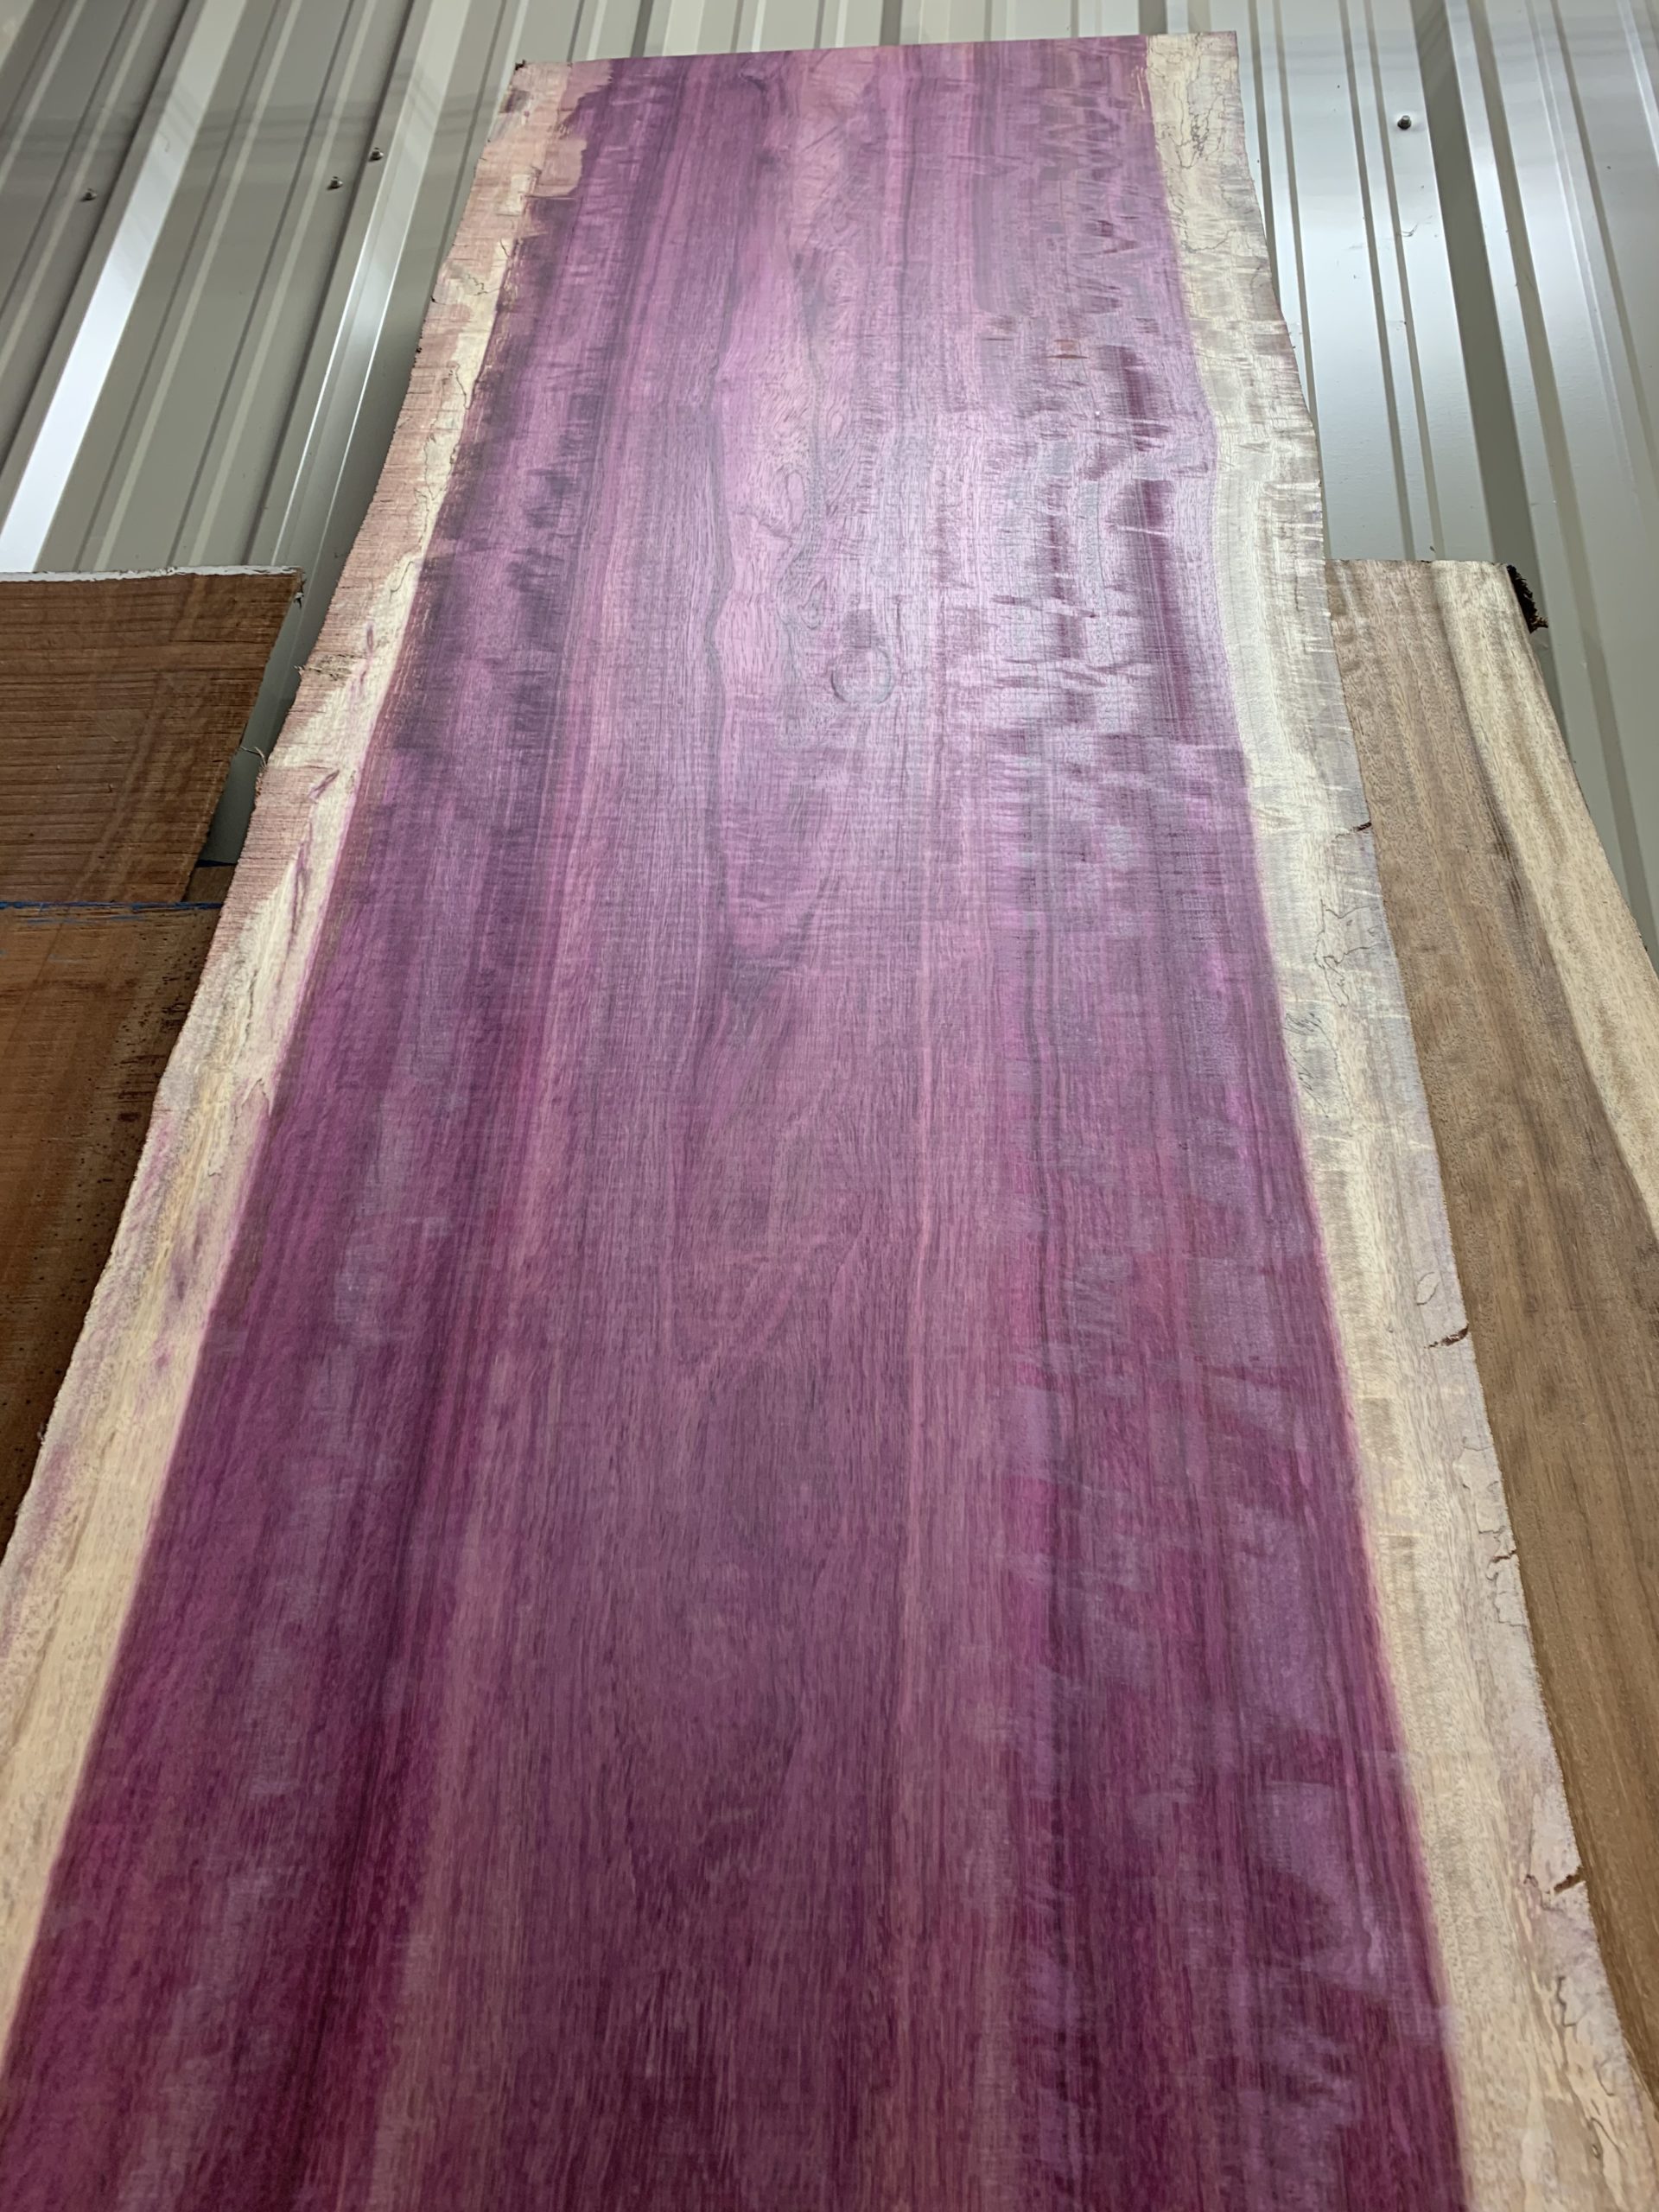 How Much is Purple Heart Wood 